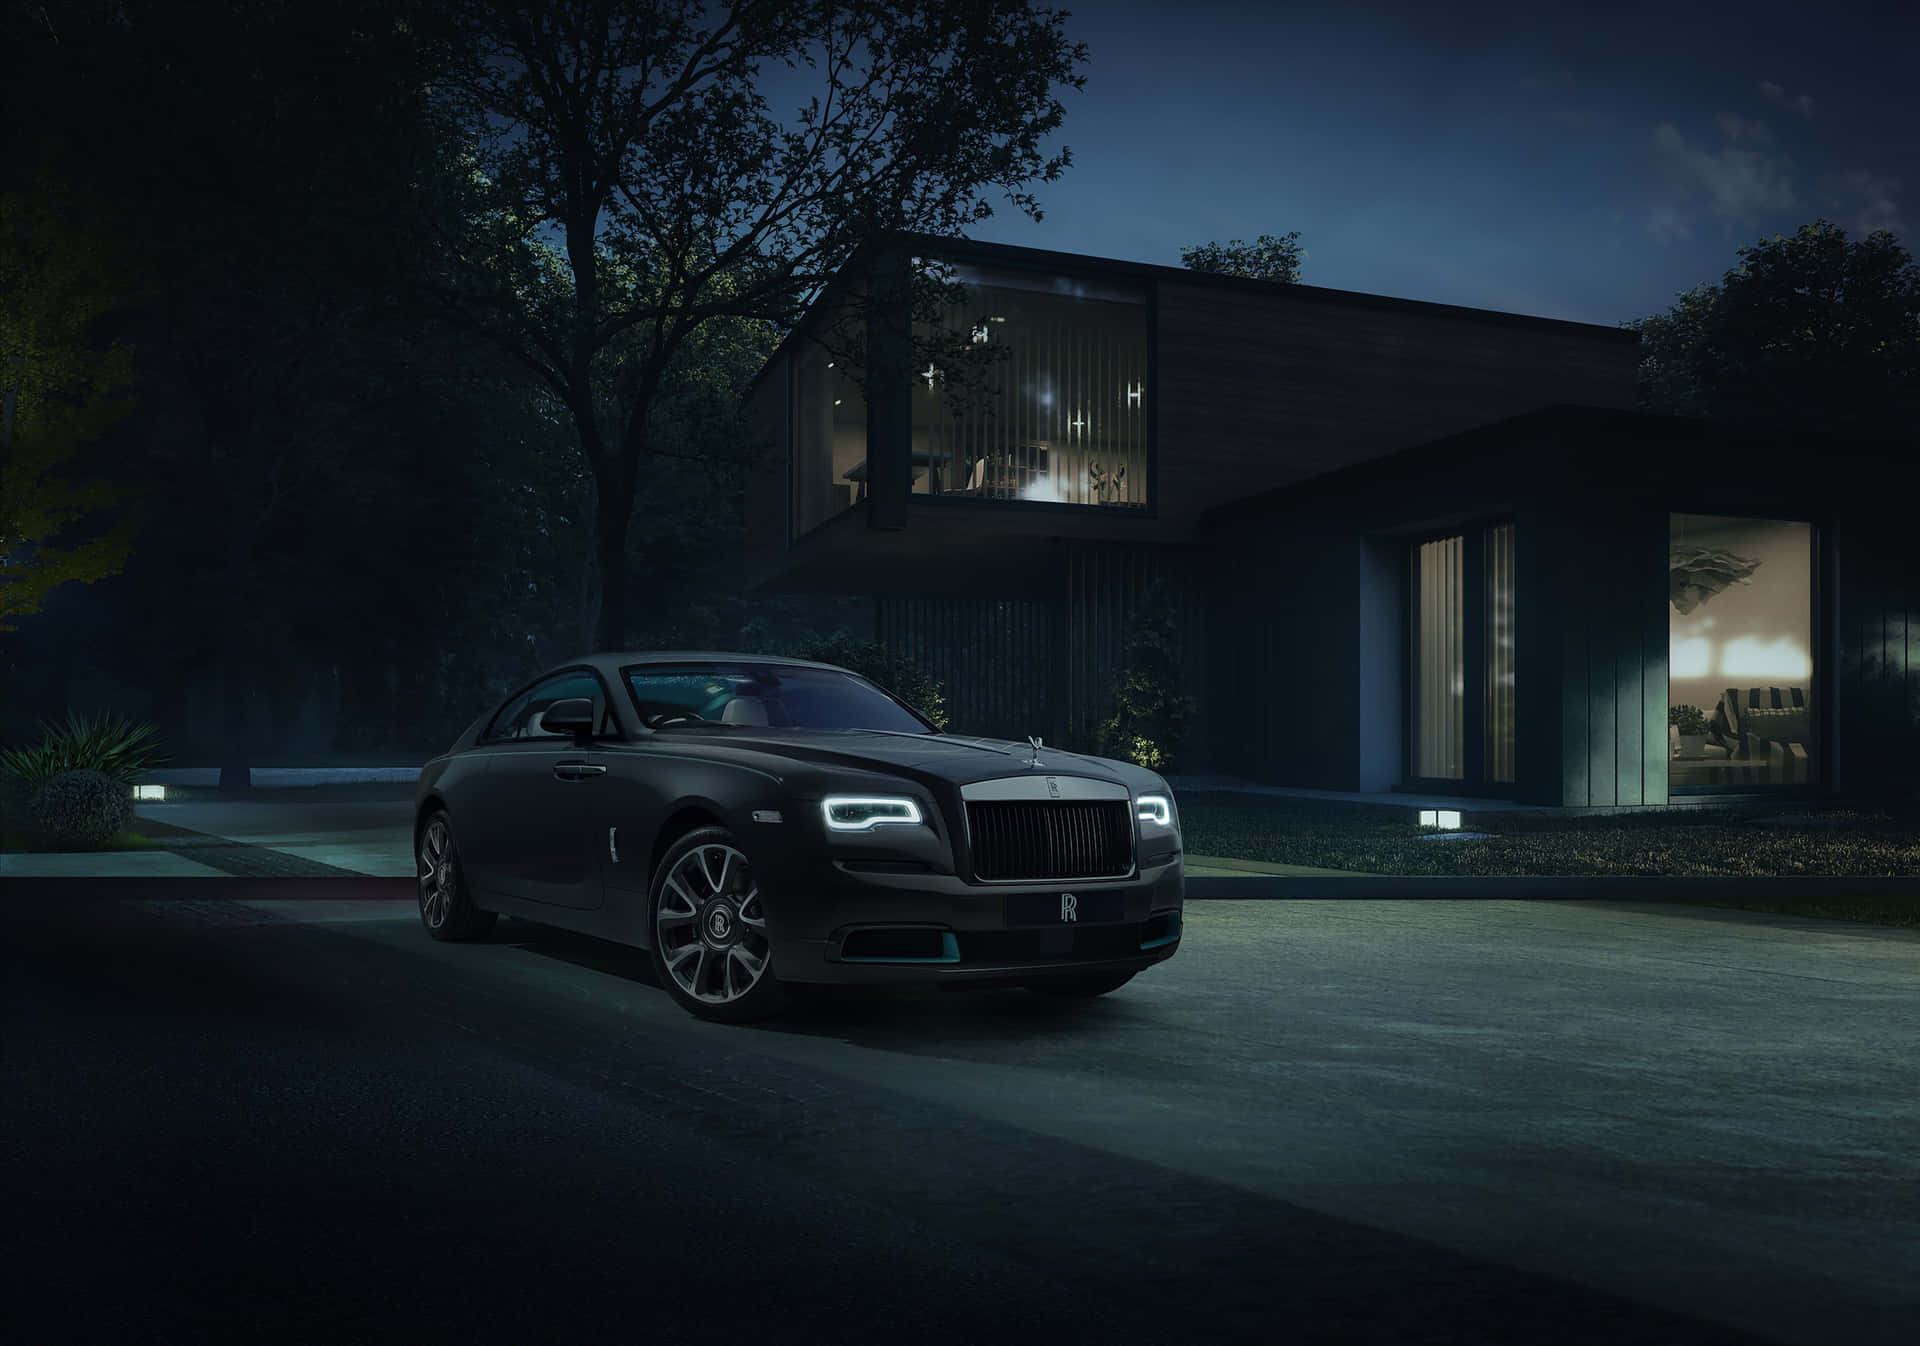 Extravagant Rolls Royce And House Wallpaper